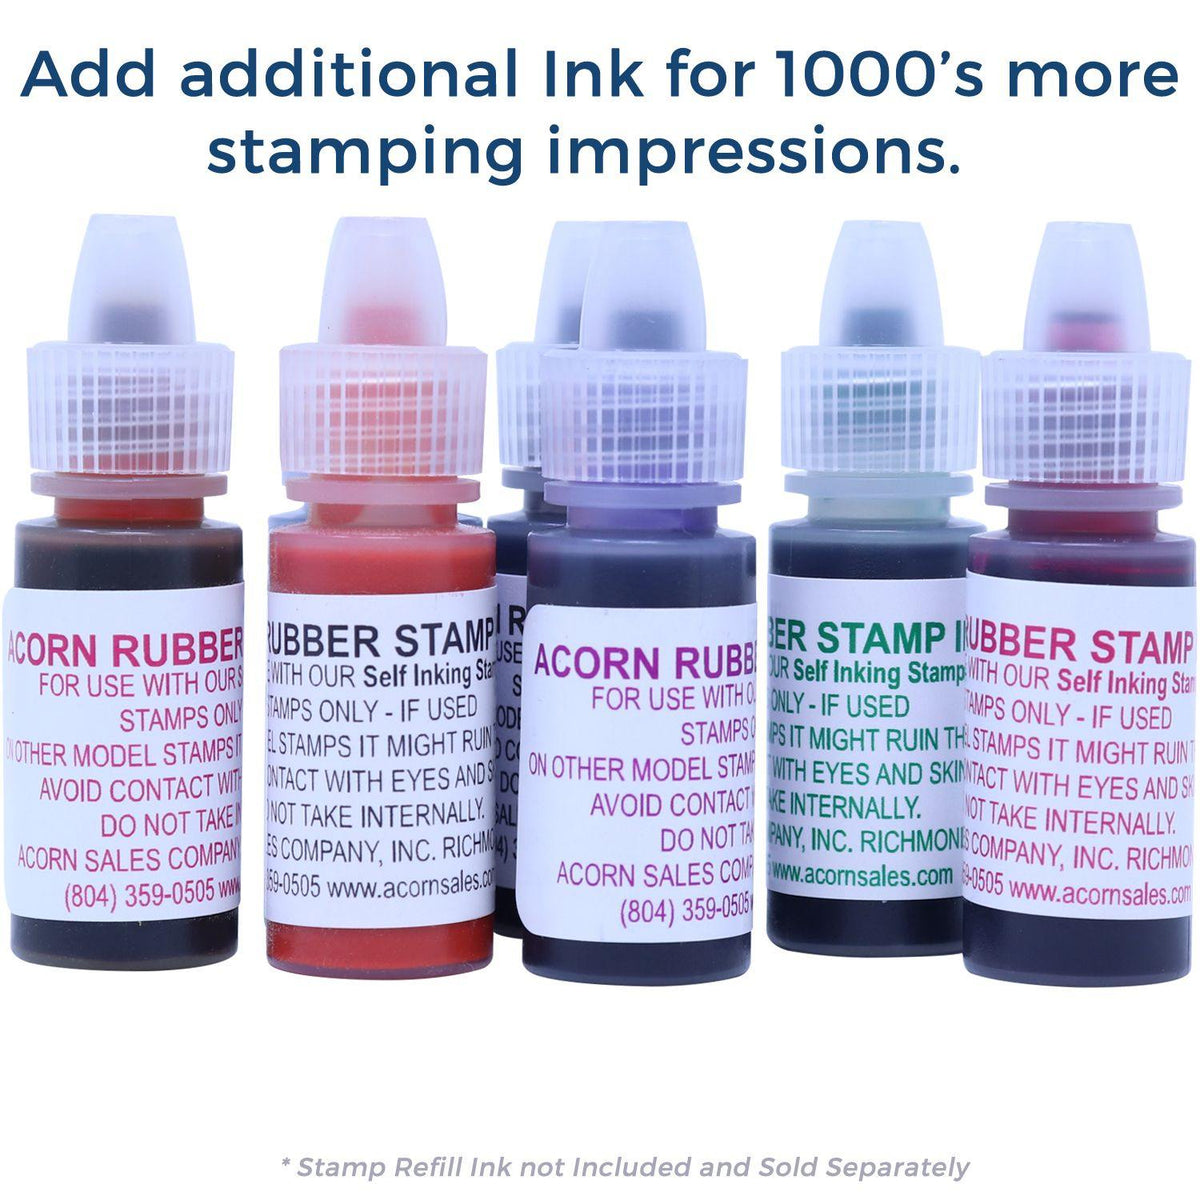 Refill Inks for Large Pre Inked Needs Improvement Stamp Available